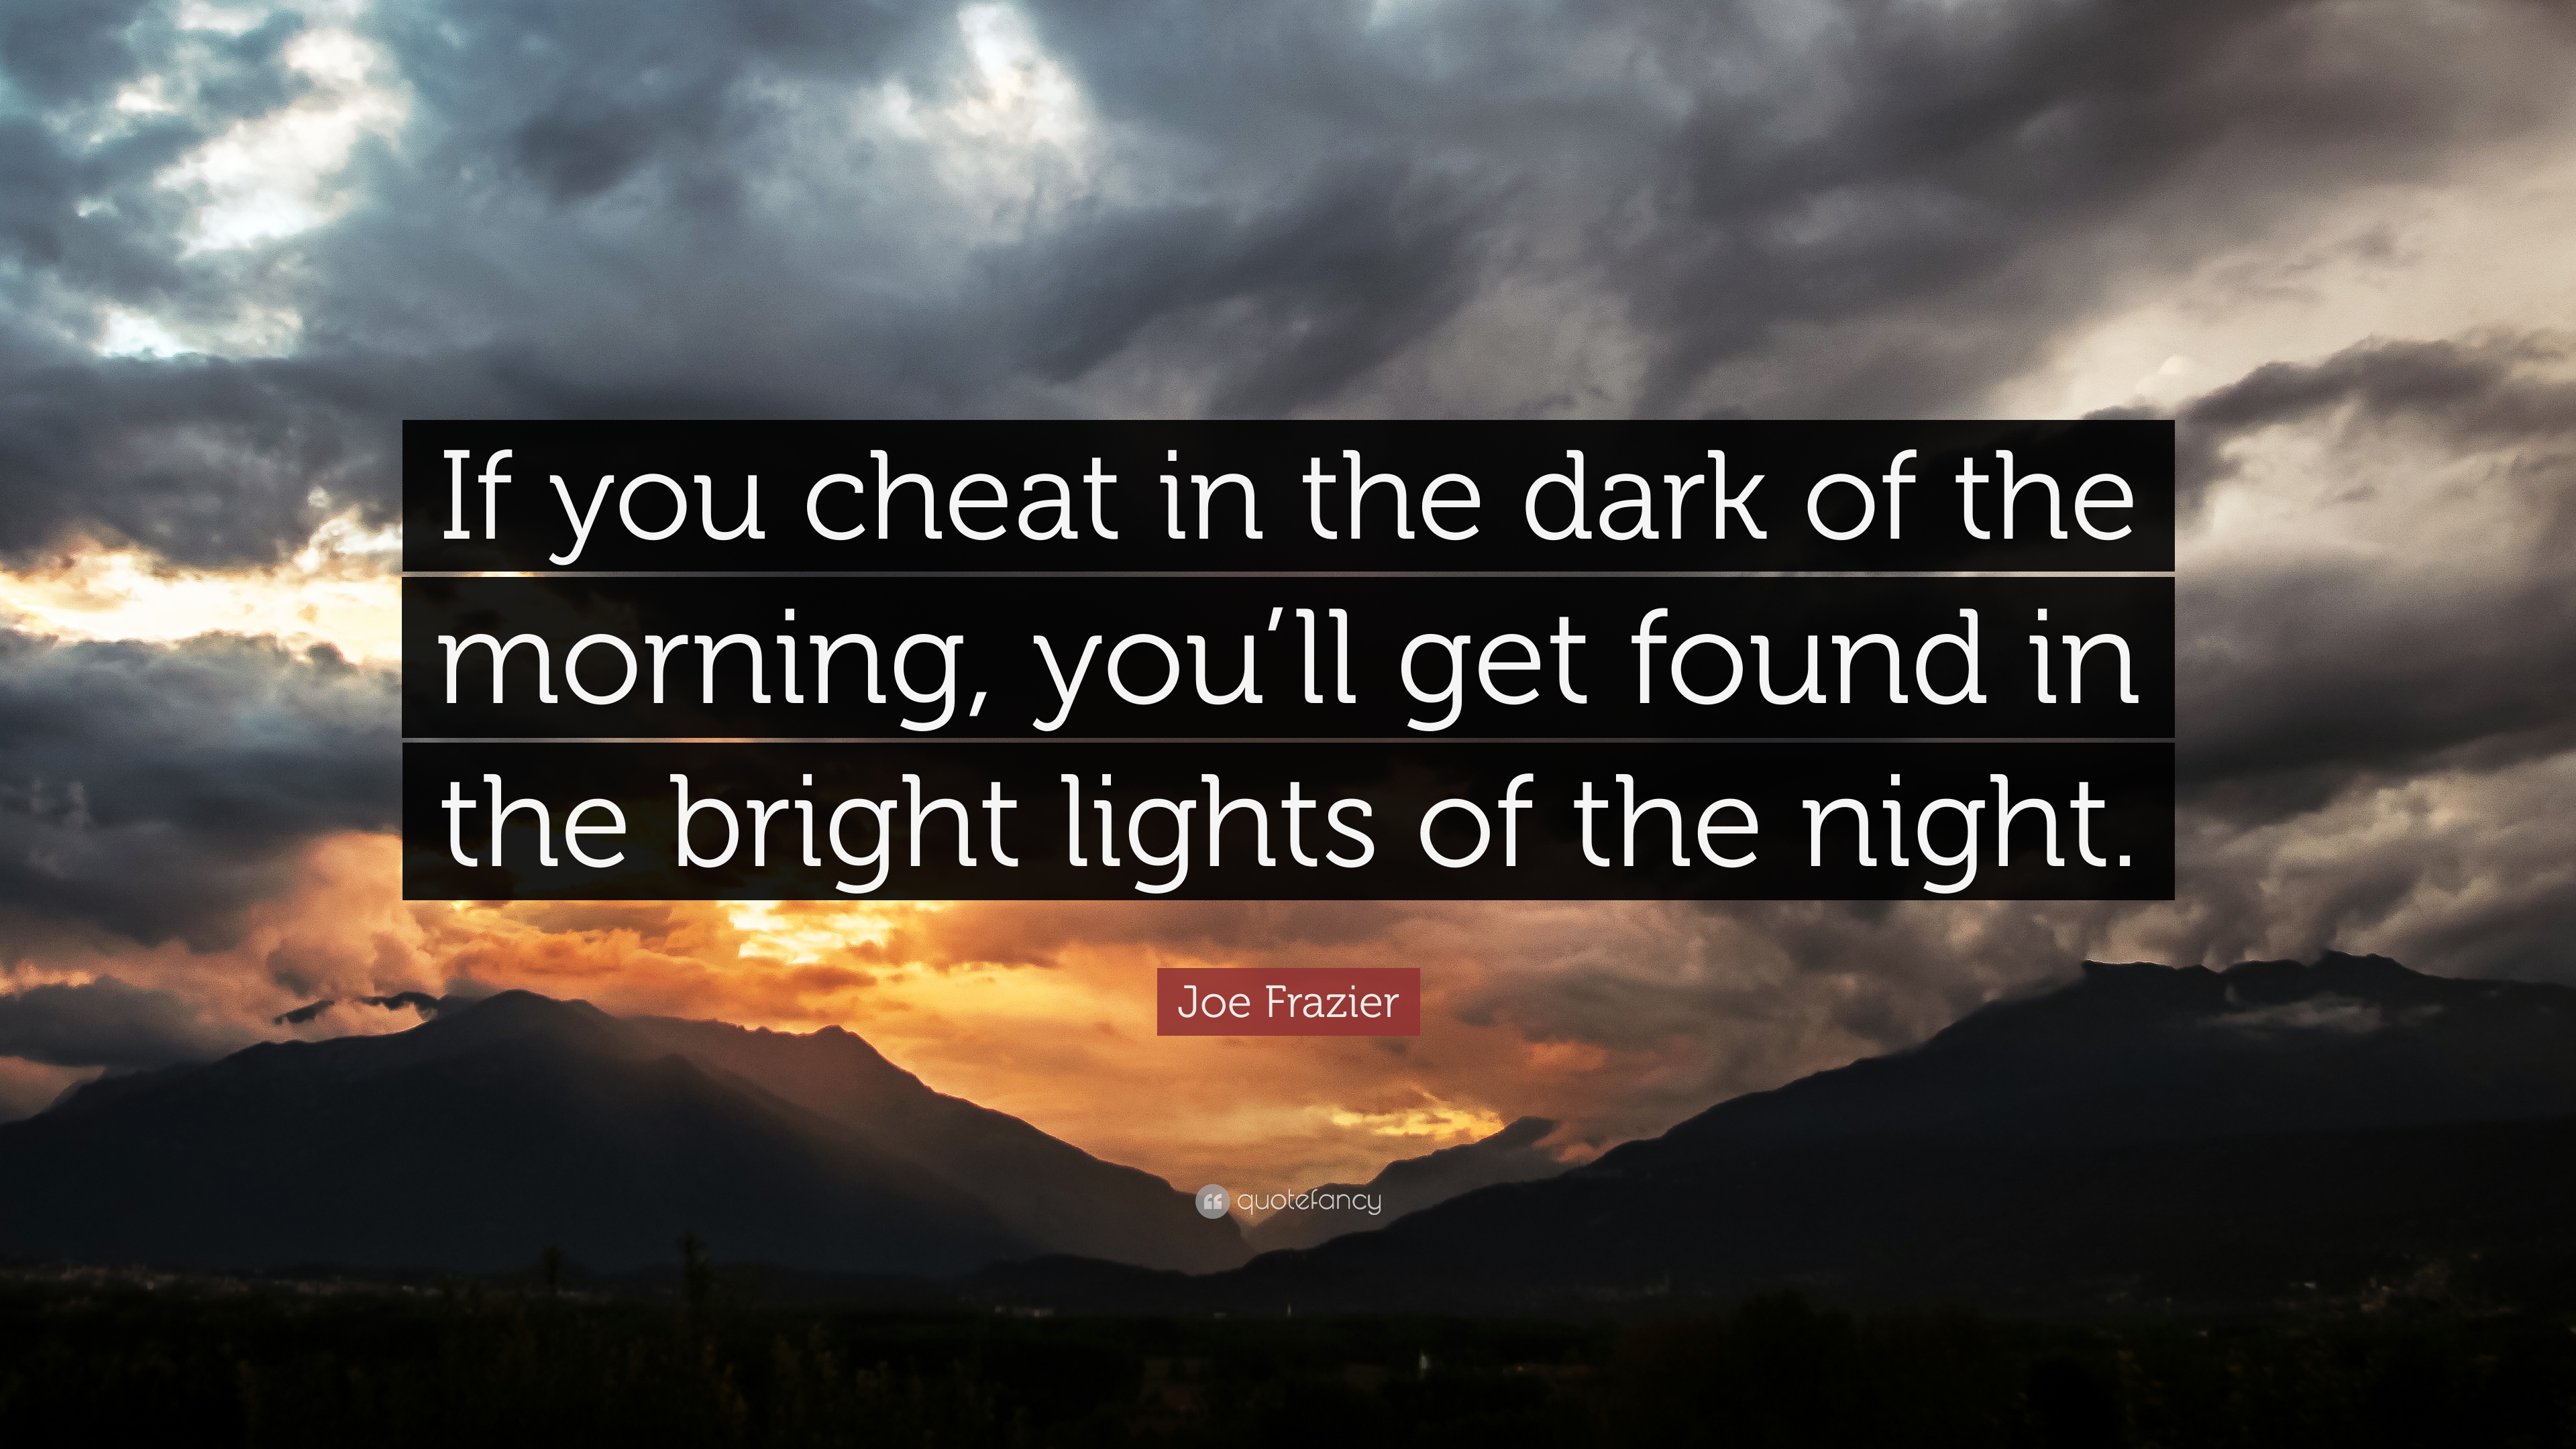 Joe Frazier Quote: “If you cheat in the dark of the morning, you'll